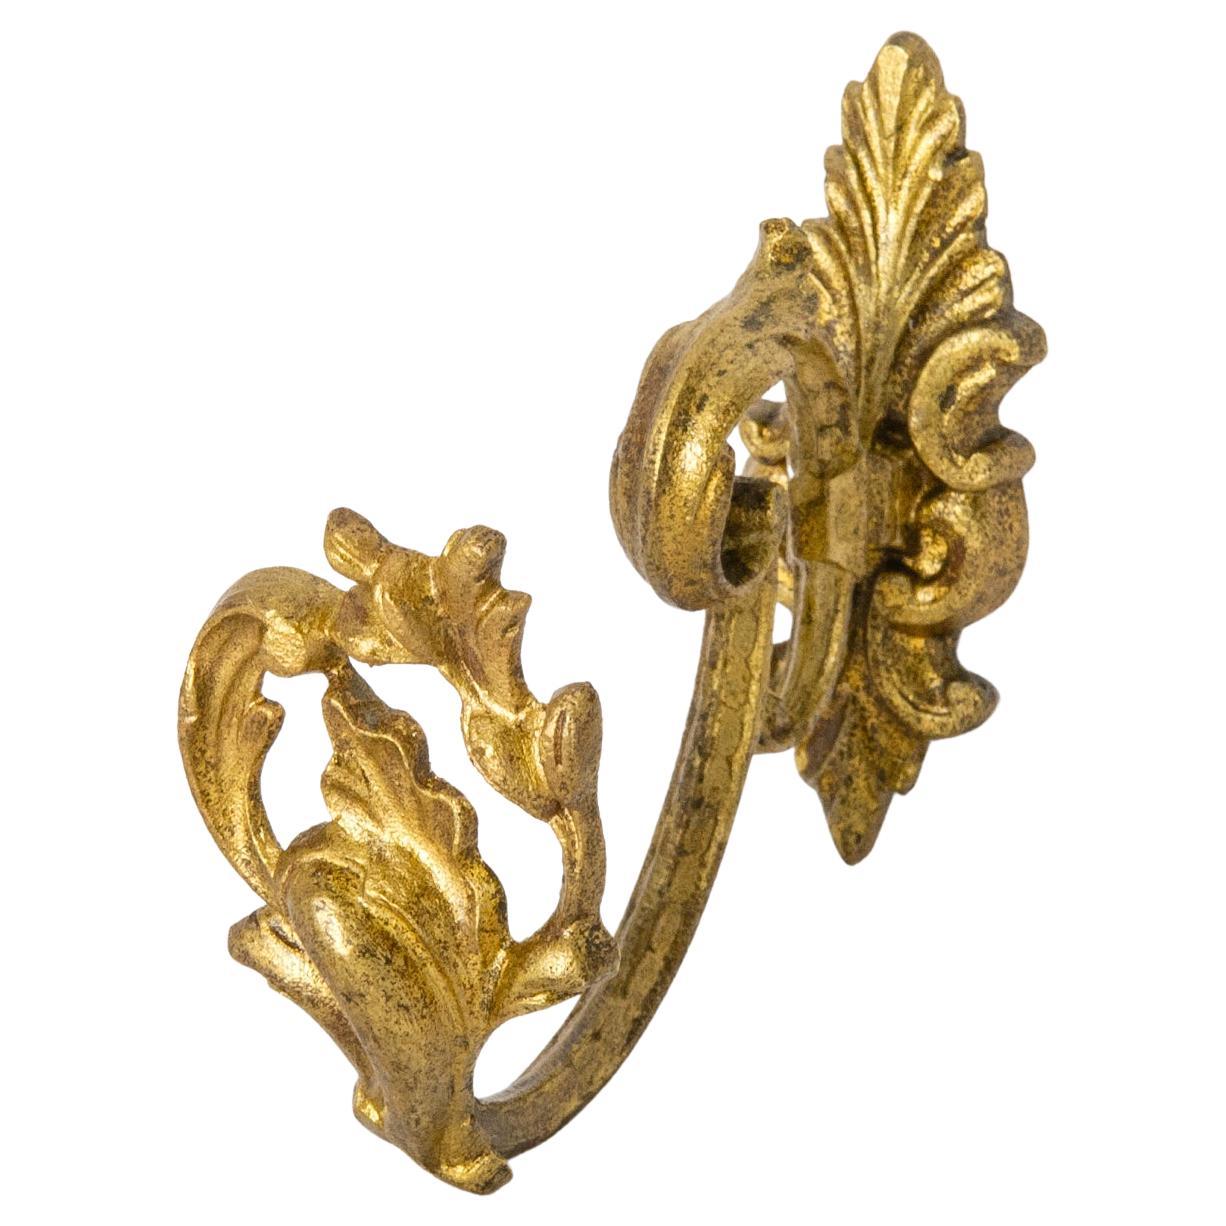 Details about   Antique Brass Curtain Tie Backs Hooks French Gothic Fleur Old Georgian Nickel 